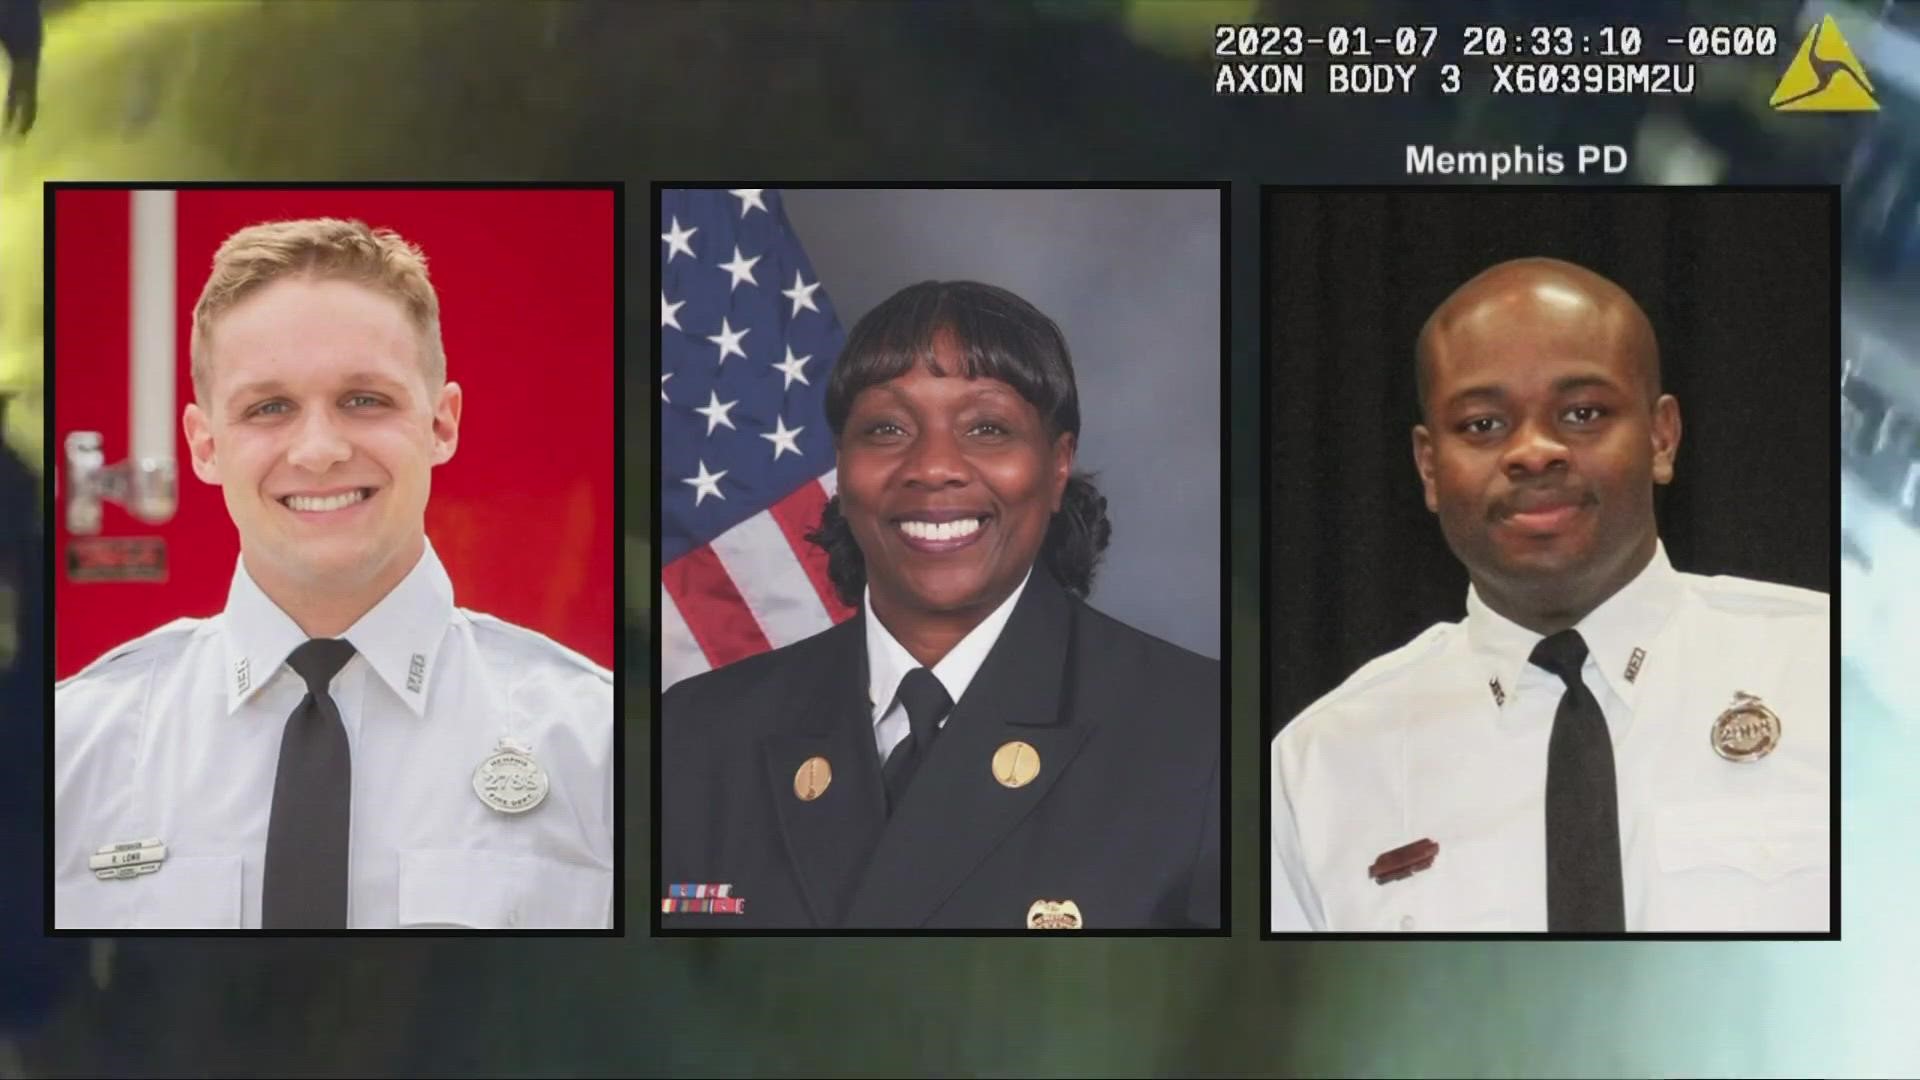 MFD said Robert Long, JaMicheal Sandridge, and Lt. Michelle Whitaker were terminated for violating 'numerous MFD Policies and Protocols.'